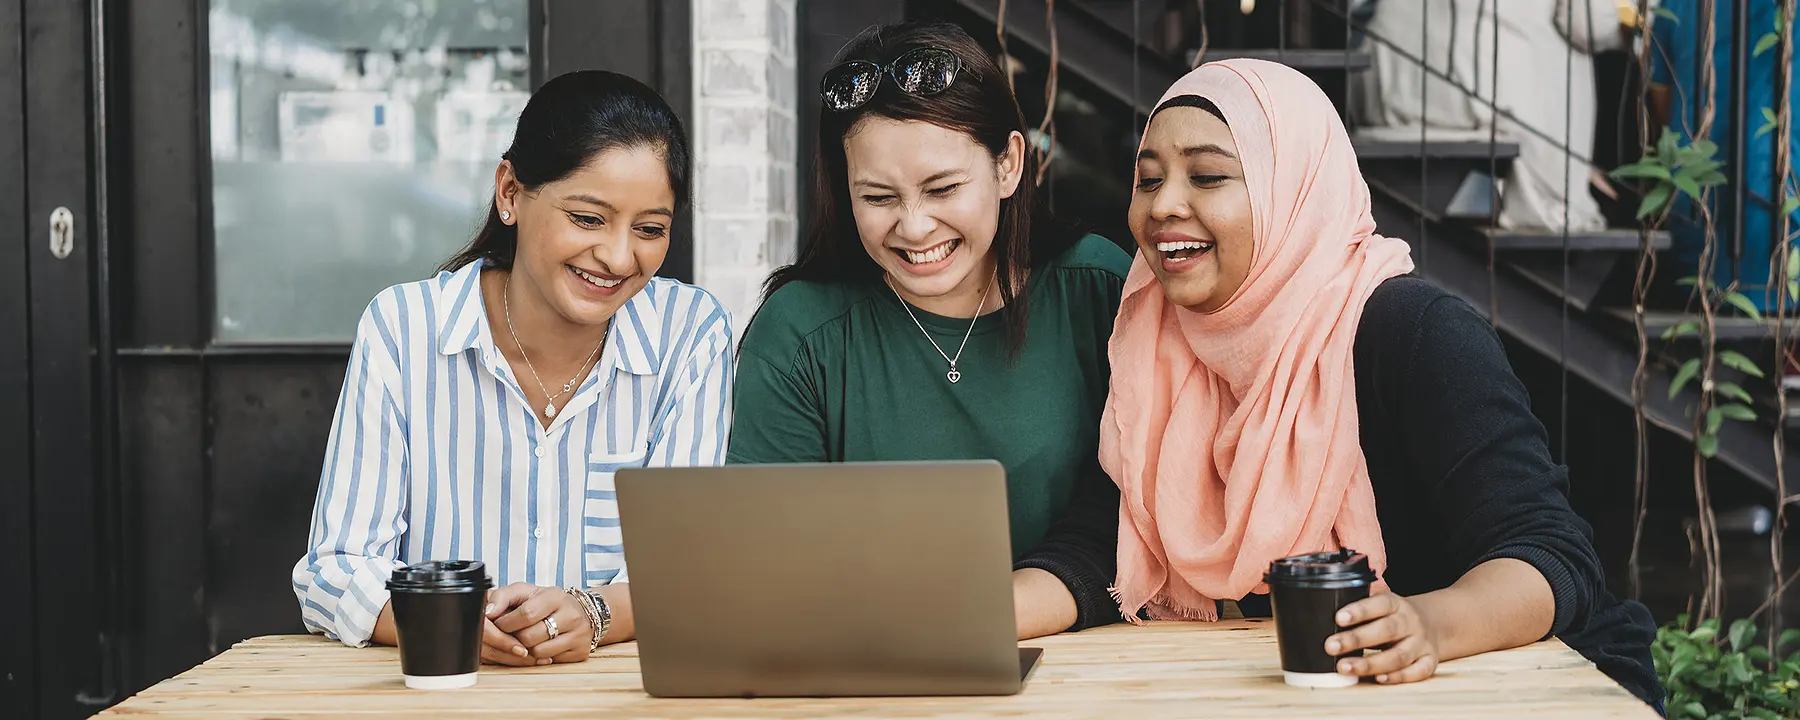 Three women using the internet at an outdoor cafe in Malaysia